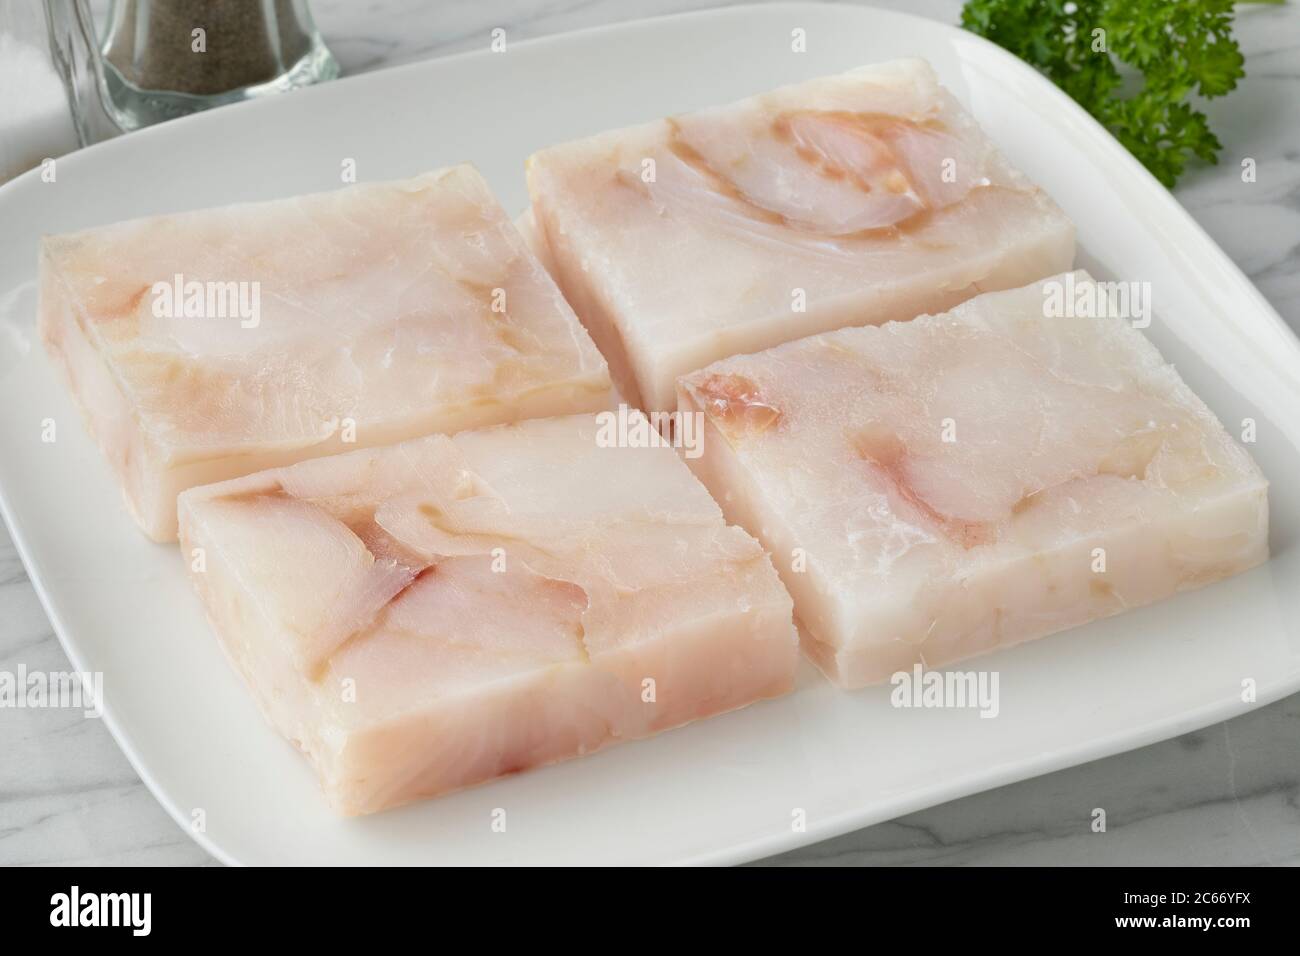 Dish with frozen cod fish fillets to thaw as an ingredient for cooking Stock Photo